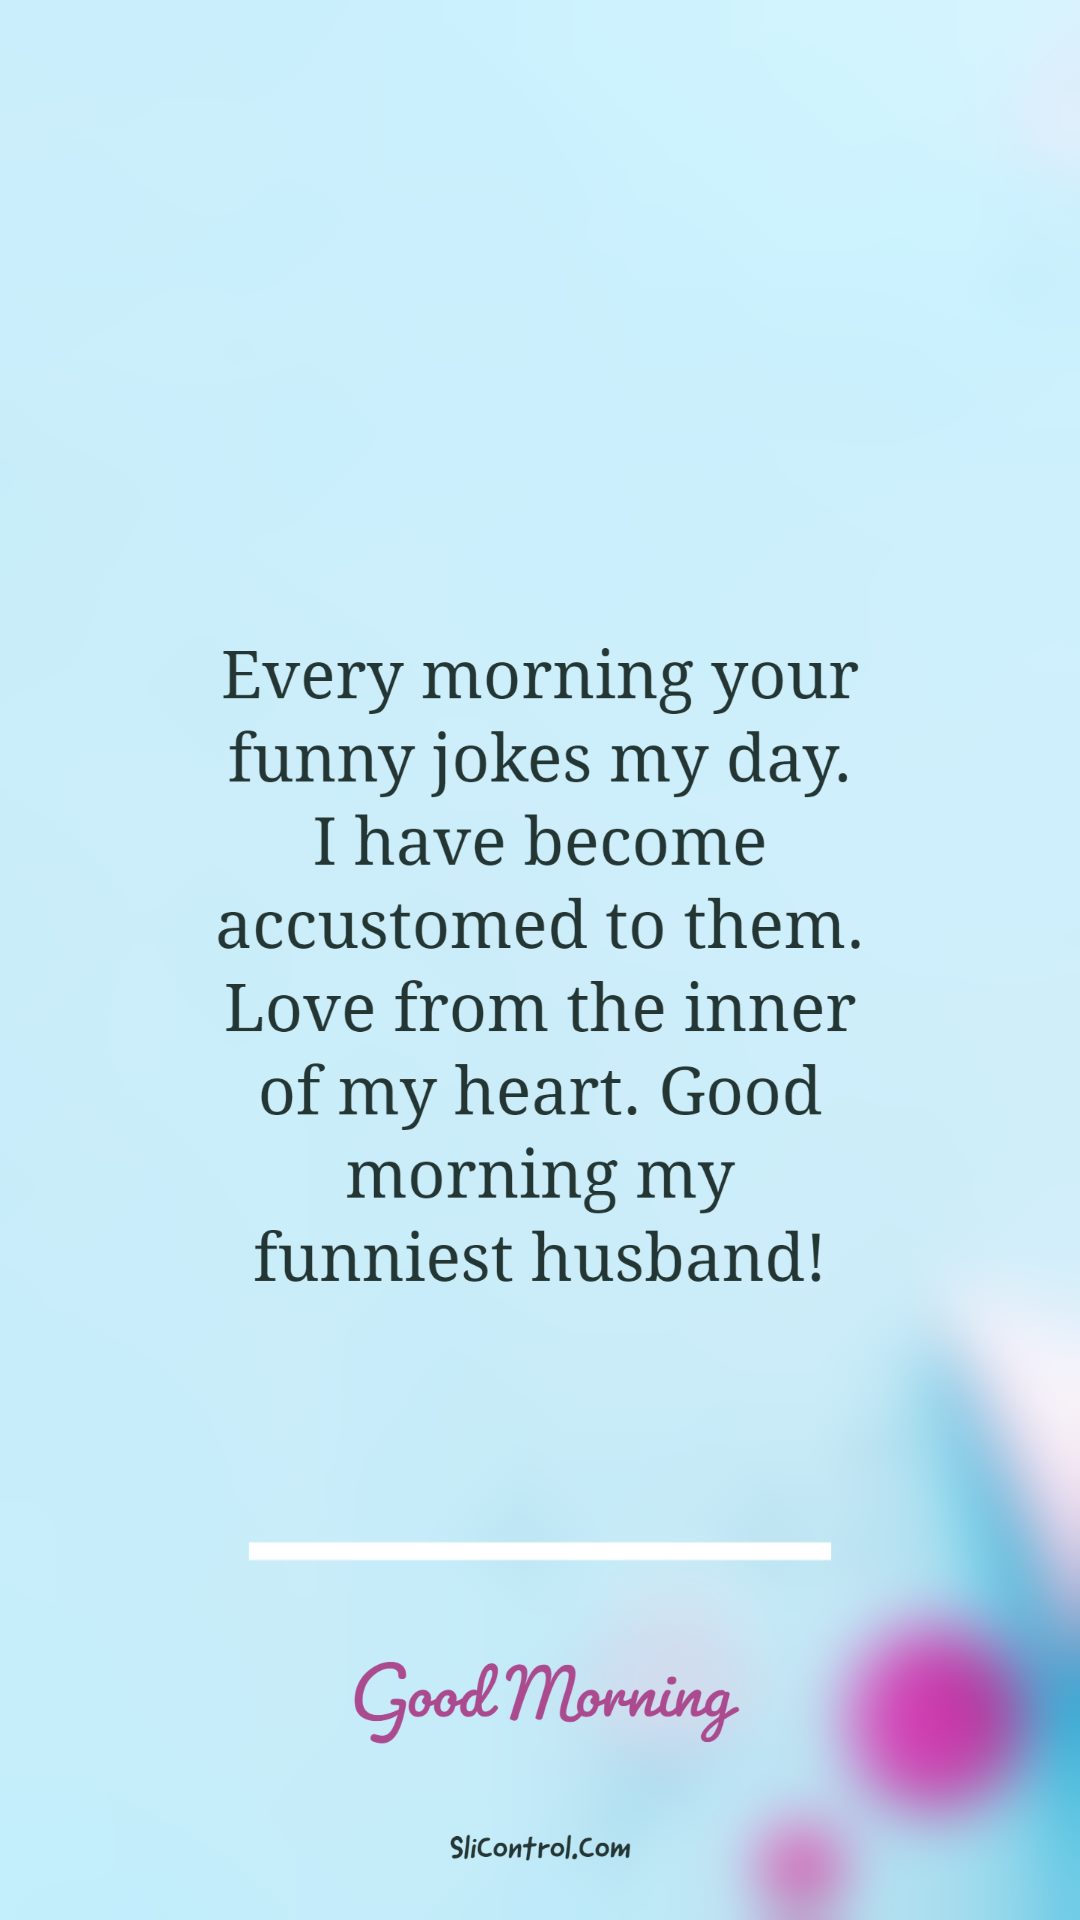 beautiful good morning quotes for husband with images for facebook